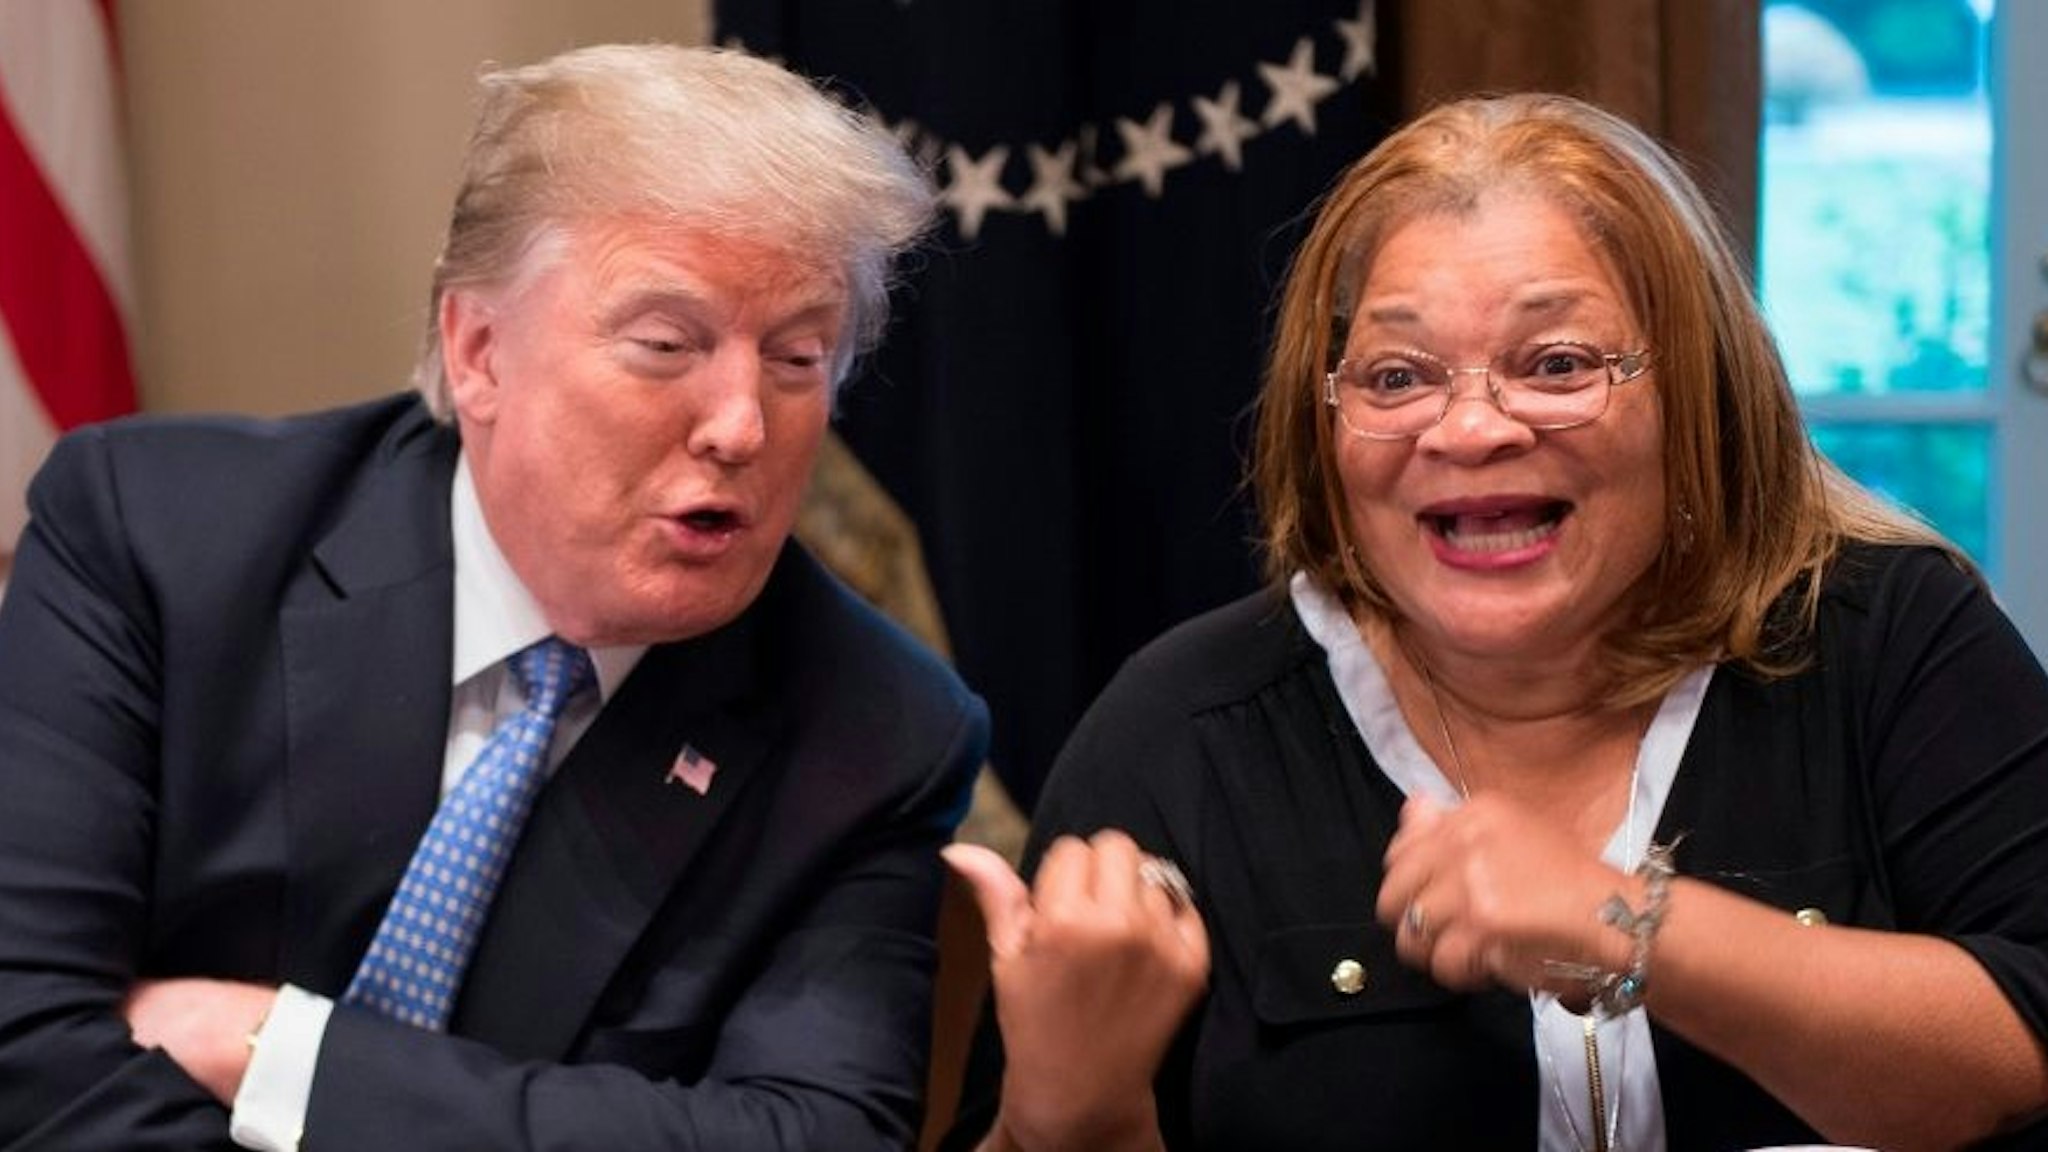 TOPSHOT - US President Donald Trump responds to Dr. Alveda King, niece of Dr. Martin Luther King Jr., during a meeting with inner city pastors at the White House in Washington, DC,on August 1, 2018. - President Trump delivered remarks at the roundtable discussion with several inner city pastors, and discussed the Administrations efforts on prison reform and other policy initiatives to improve Americans in inner cities.